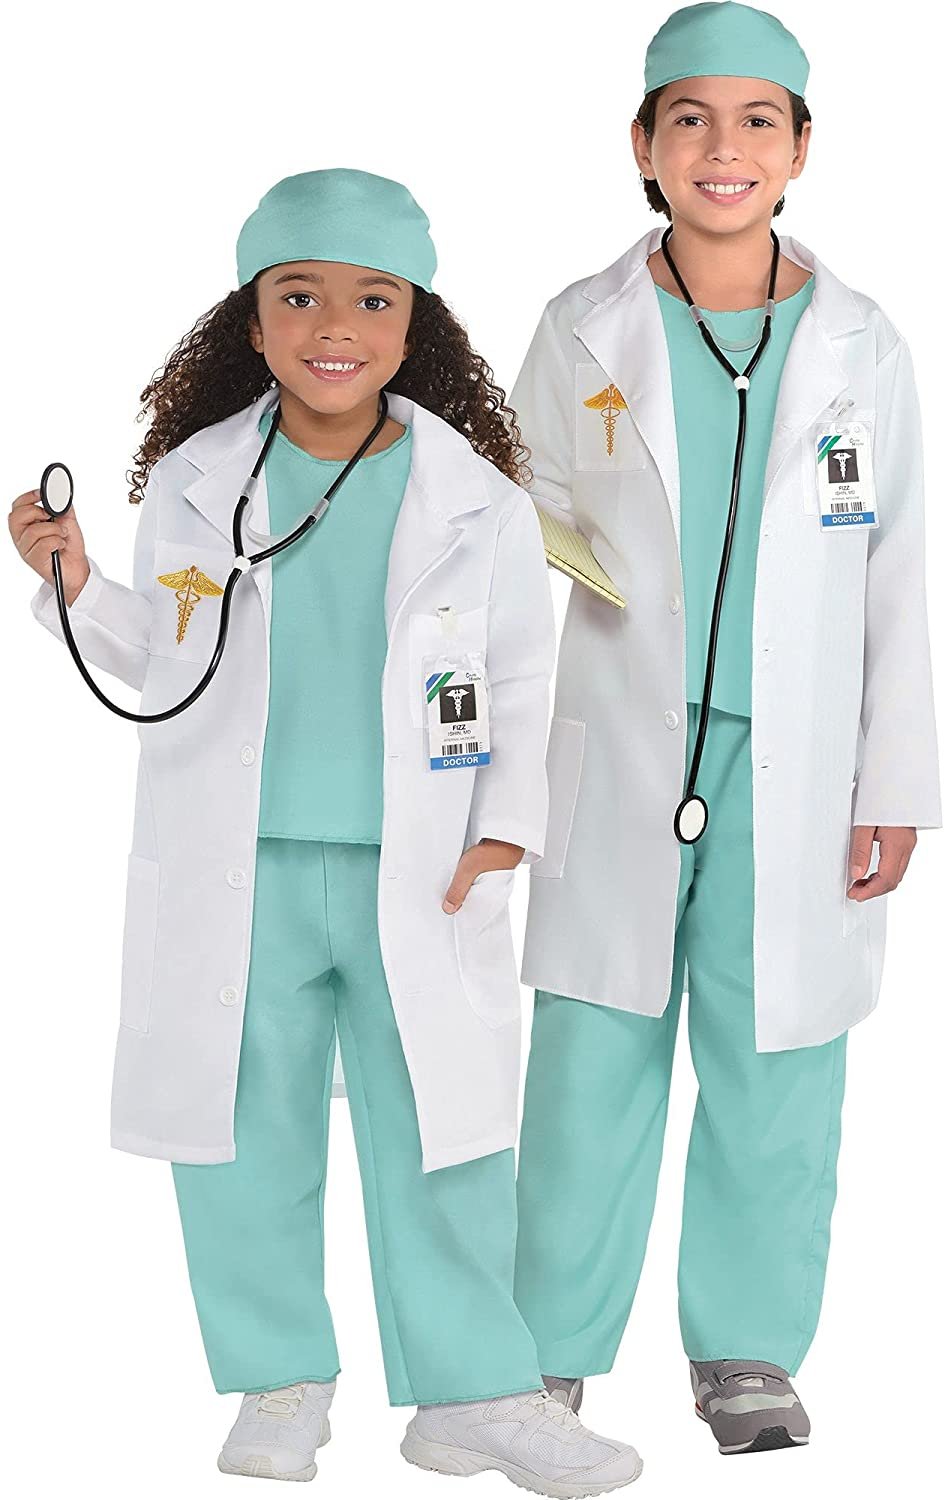 Amscan Unisex Doctor Halloween Costume for Kids, Includes Coat, Shirt, Pants, Hat, Stethoscope and Badge